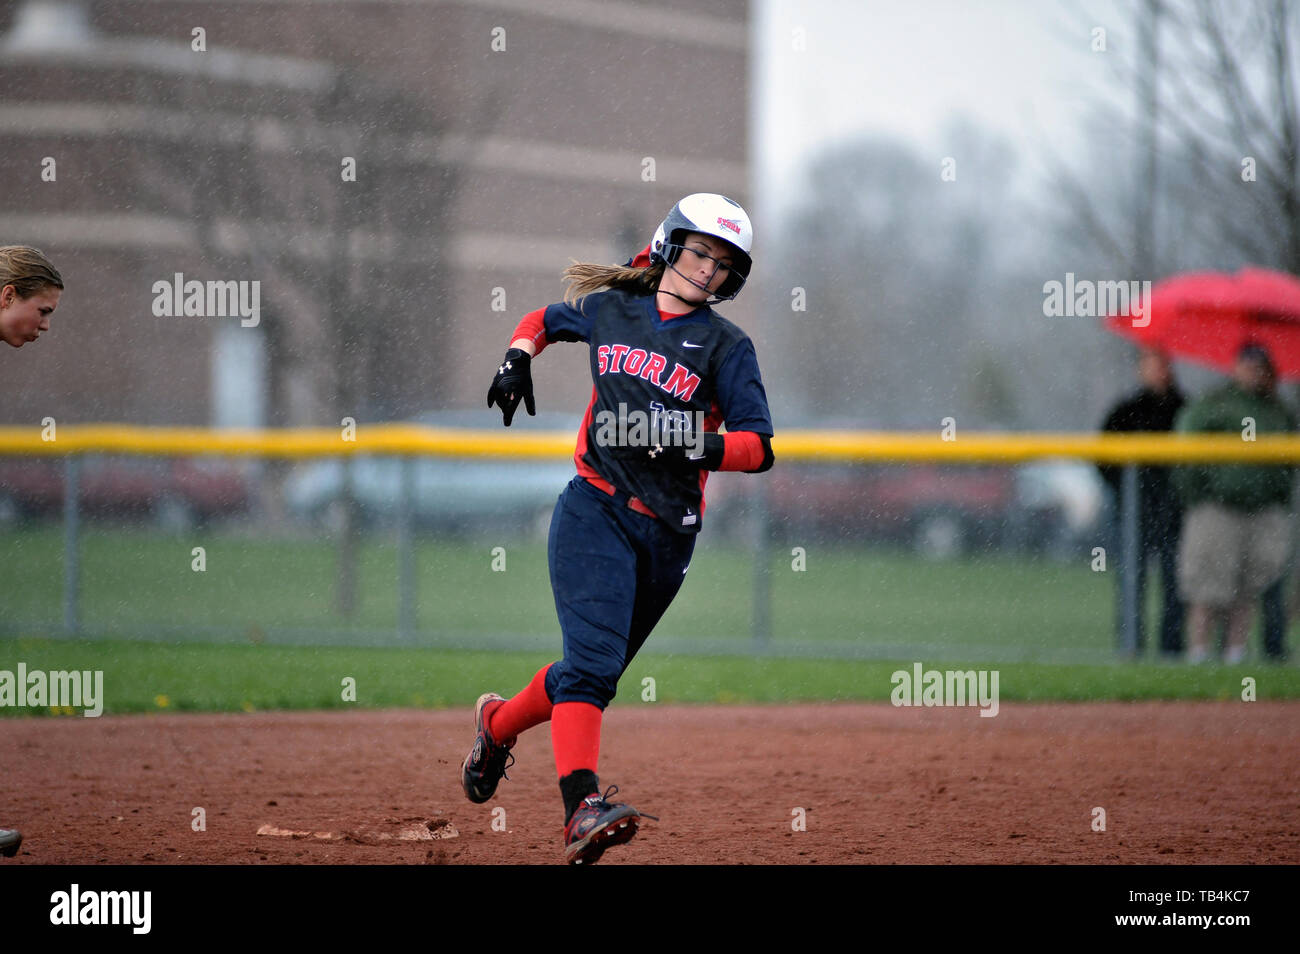 Batter rounding second base during her home run trot during a high school softball game. USA. Stock Photo